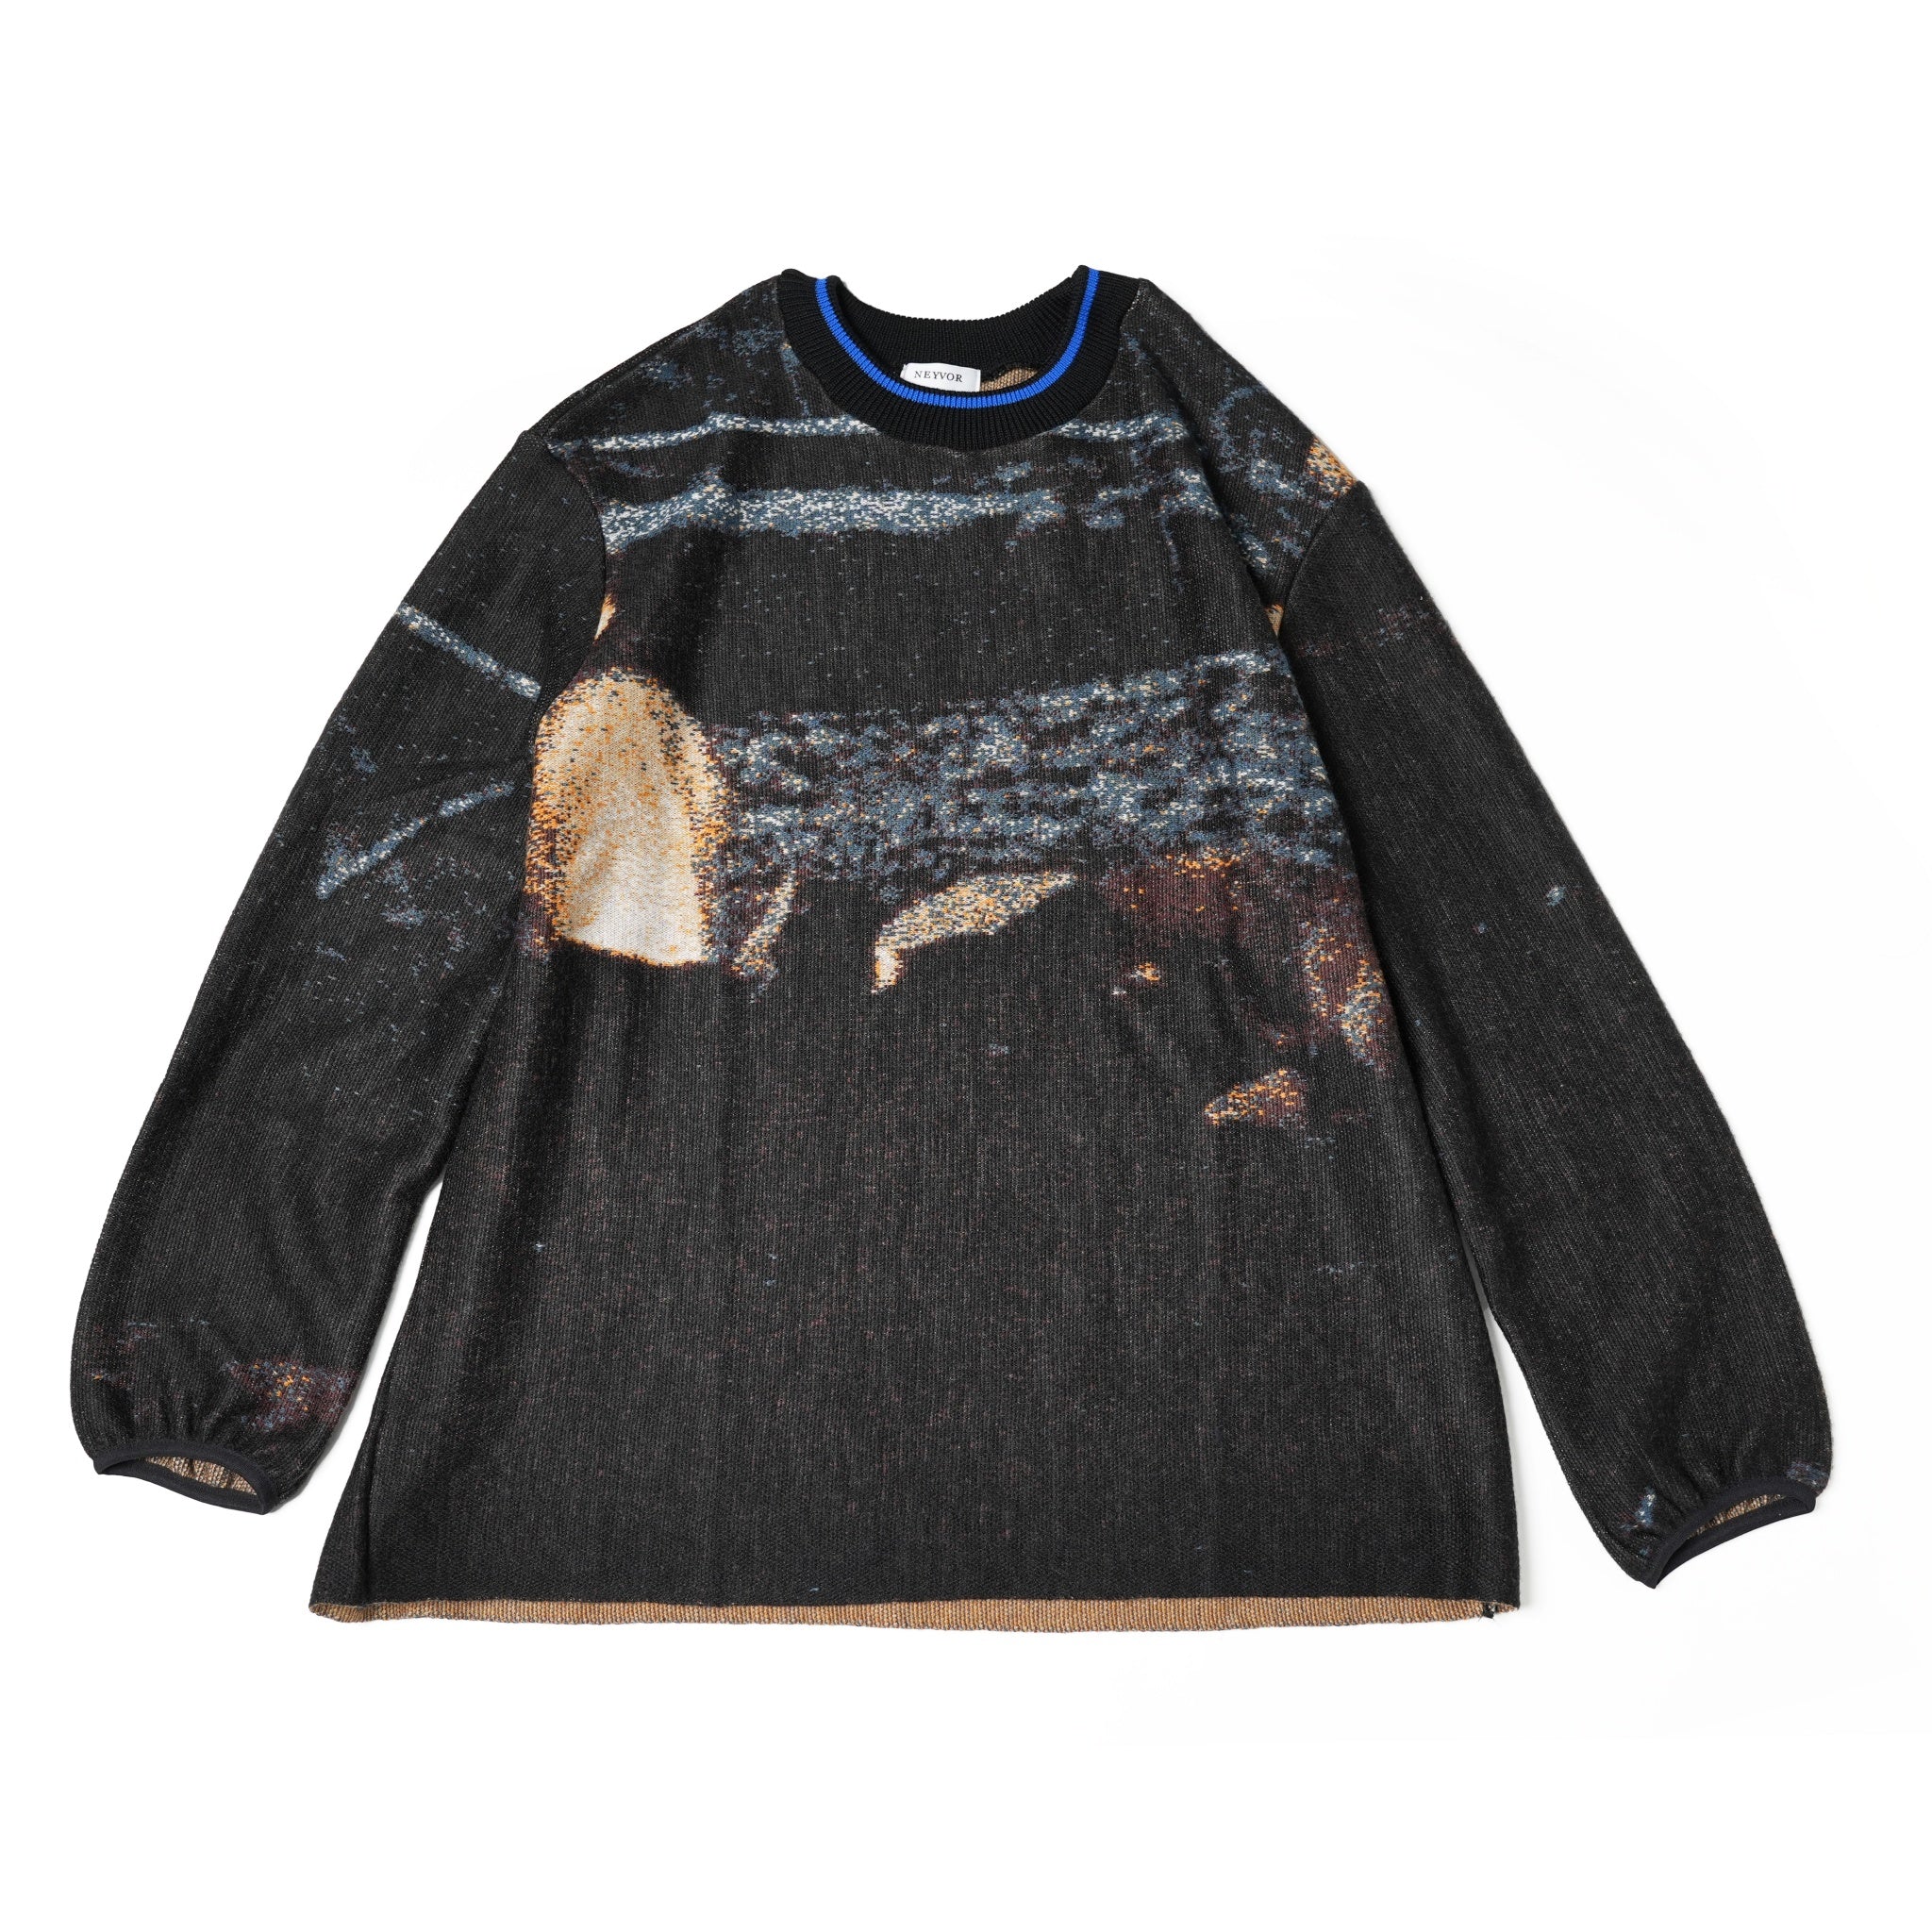 No:NV23AW-10 | Name:Road Movies Knit Sweater | Color:Black【NEYVOR_ネイバー】